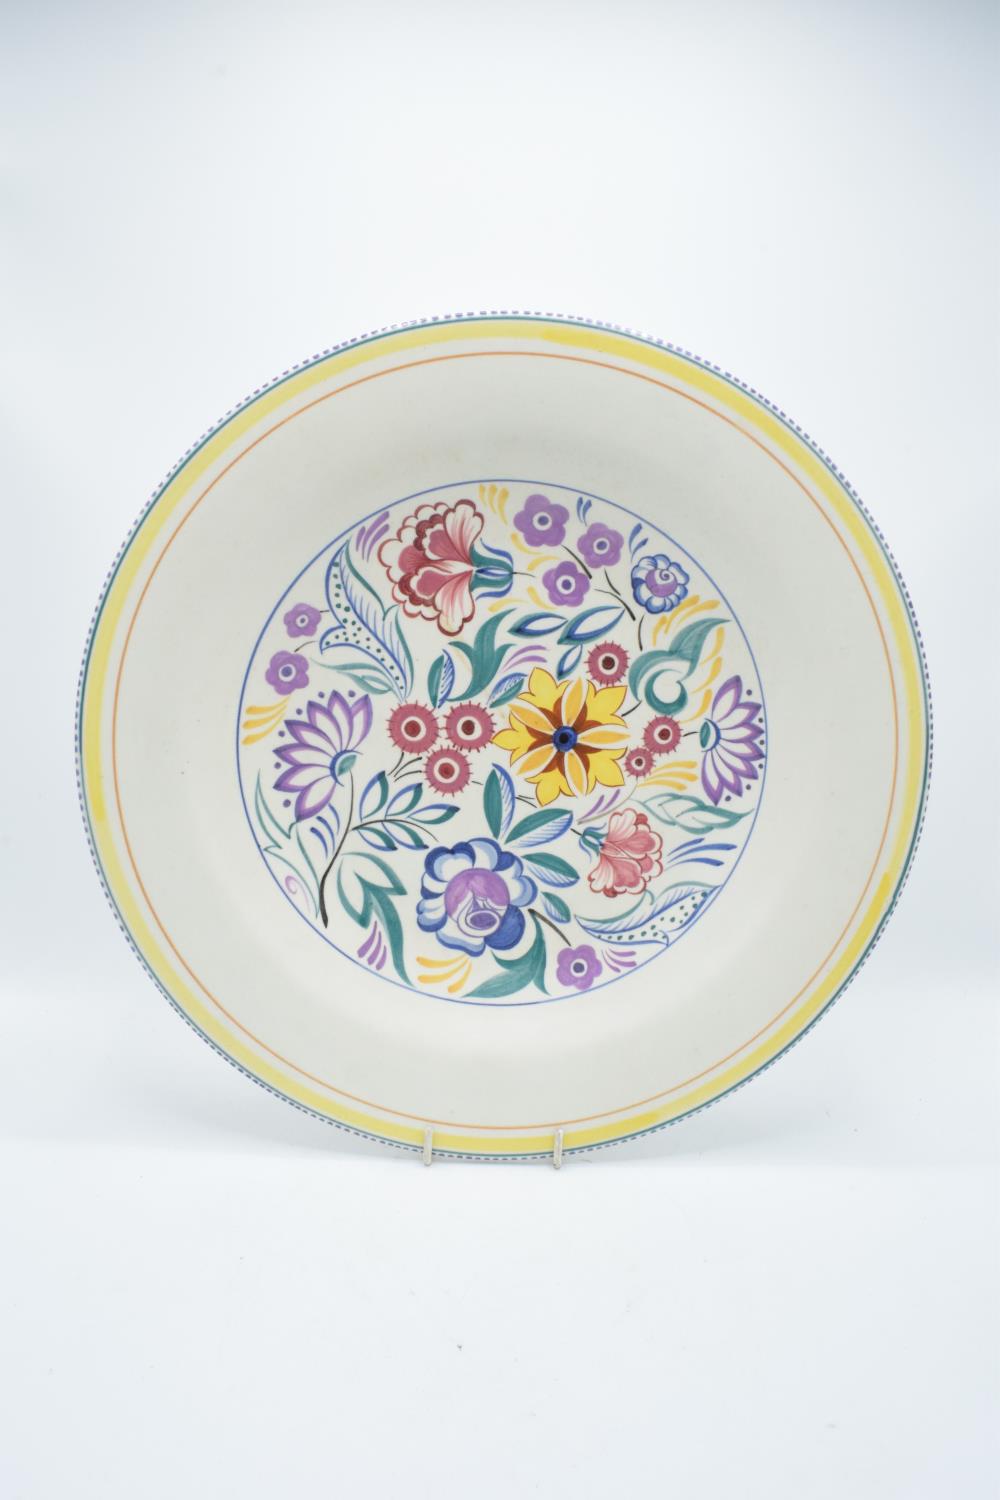 Large Poole Pottery floral charger, 39cm diameter. In good condition with no obvious damage or